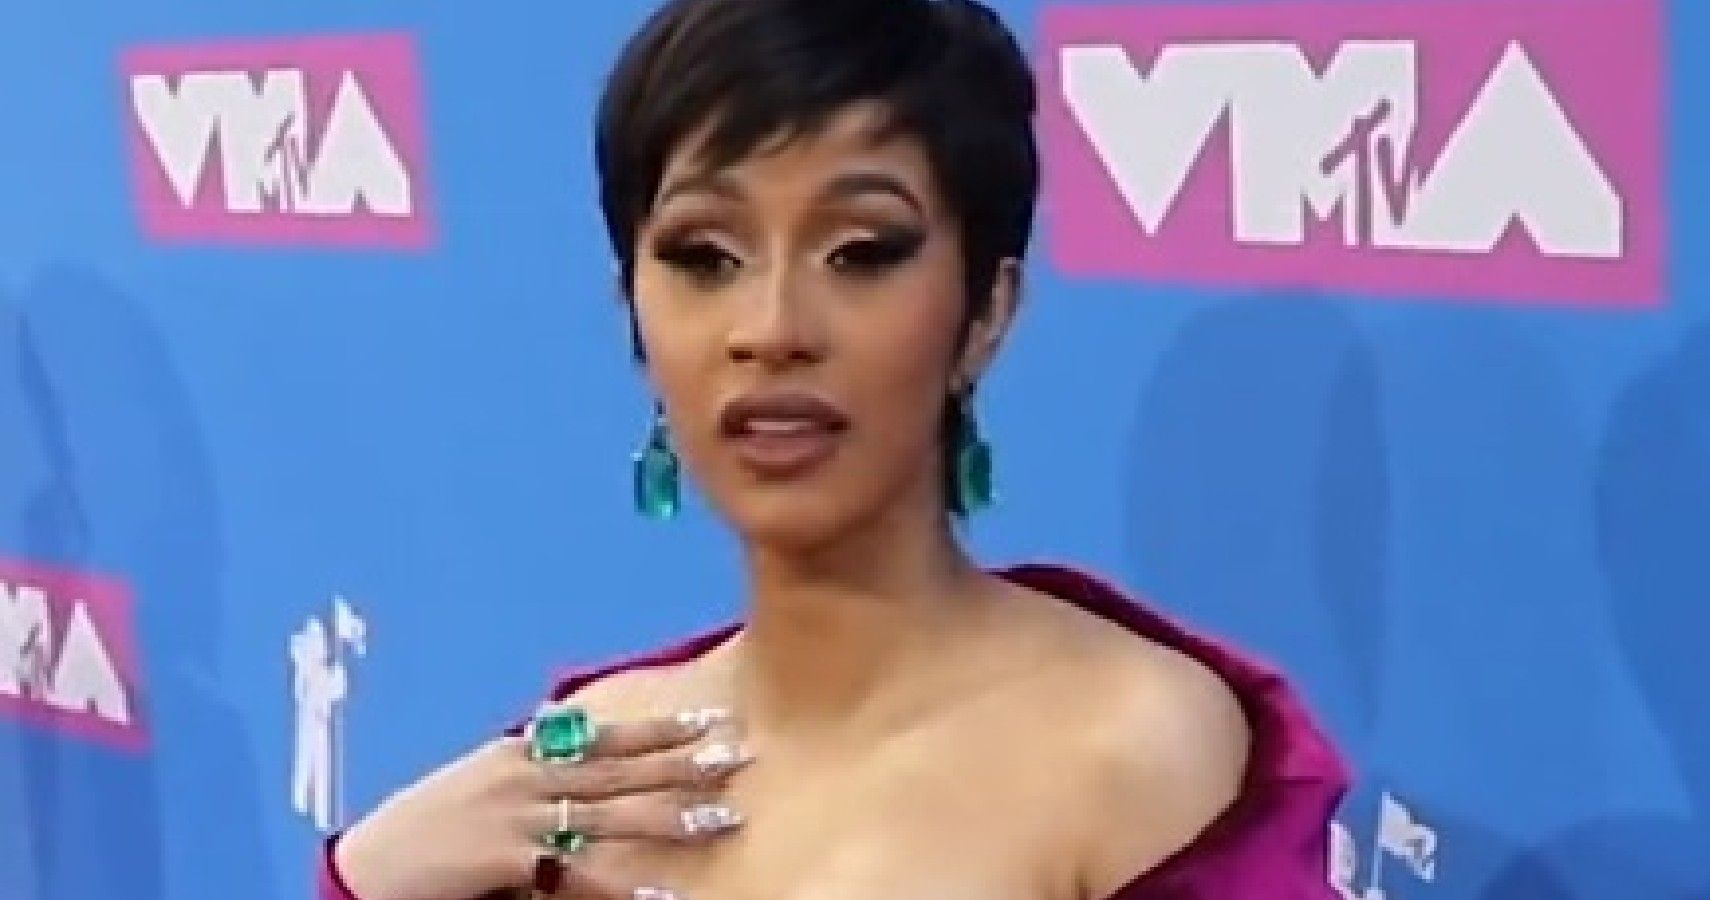 Cardi B Announced She's Pregnant With Baby No. 2 At BET Awards